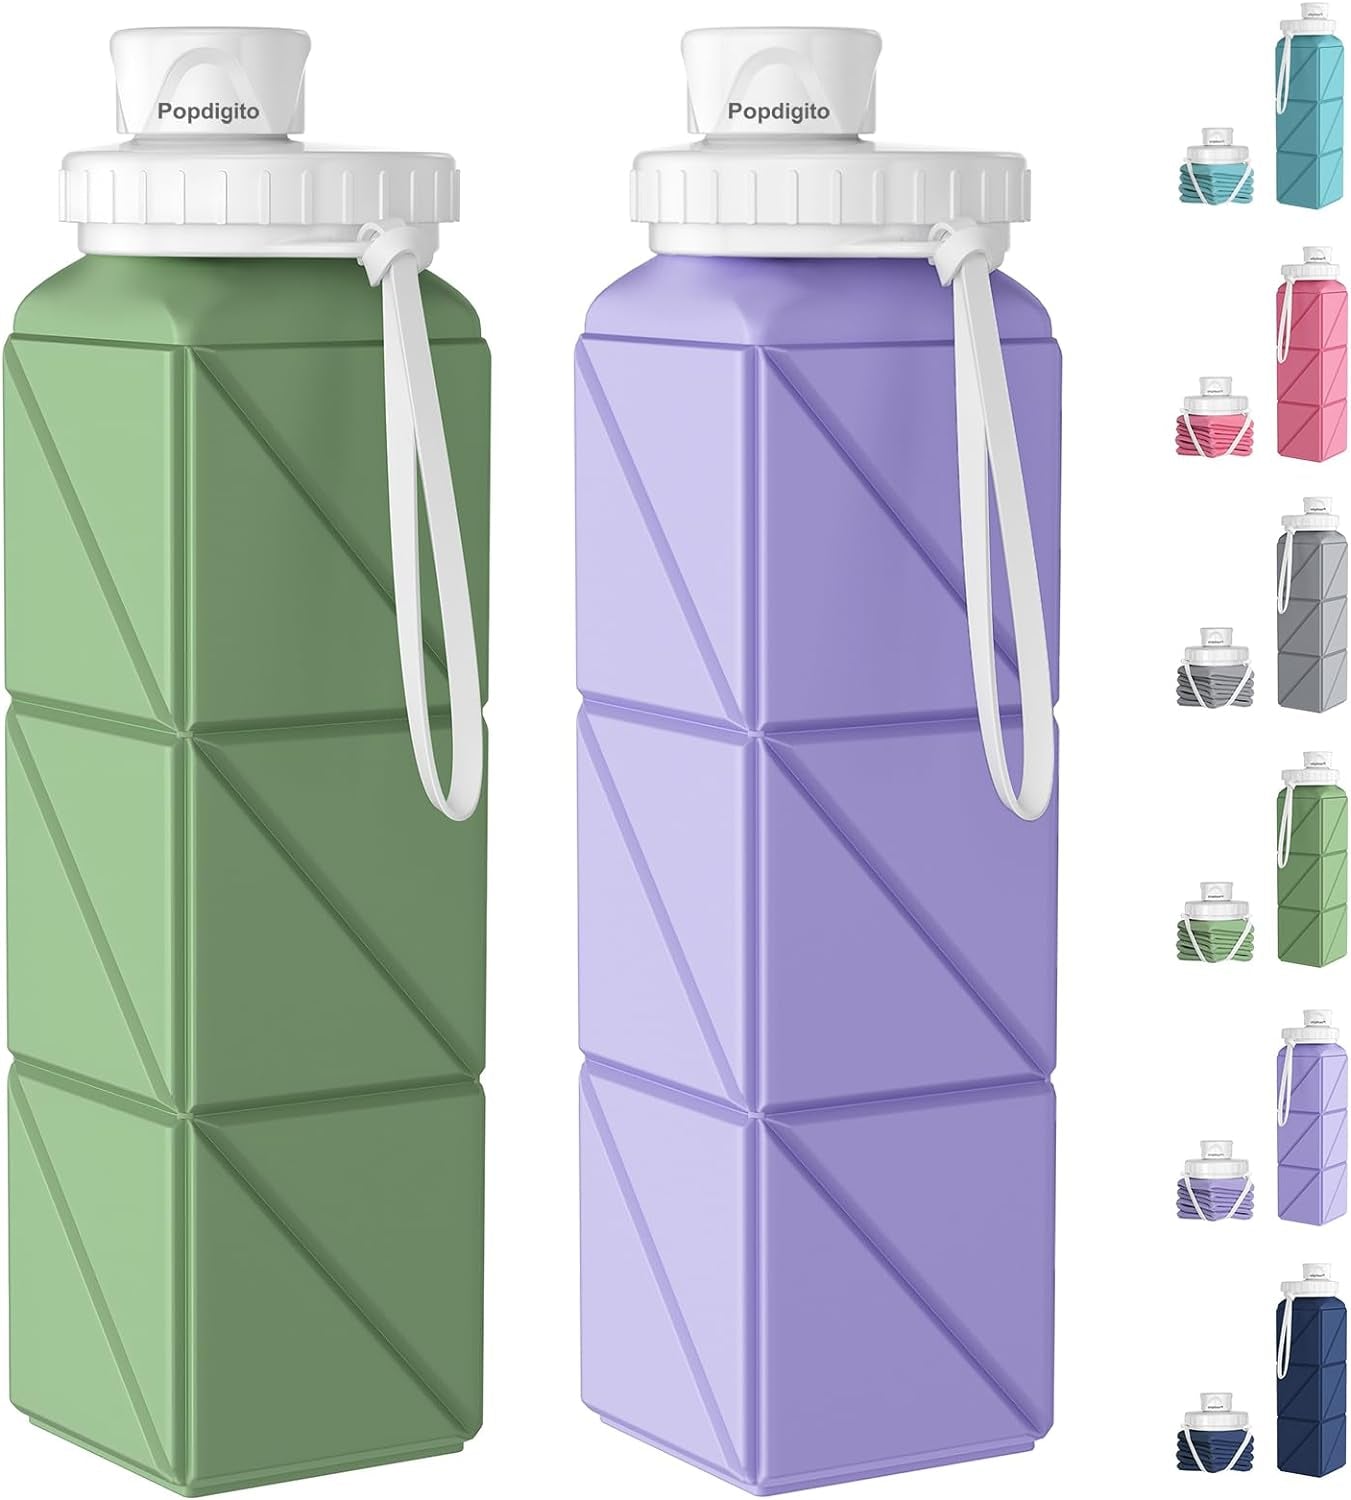 Collapsible Water Bottles Food-Grade Bpa-Free Silicone Travel Bottles Leakproof Foldable Water Bottle 610Ml for Travel Gym Hiking Camping Running Sport Lightweight Portable Water Bottle